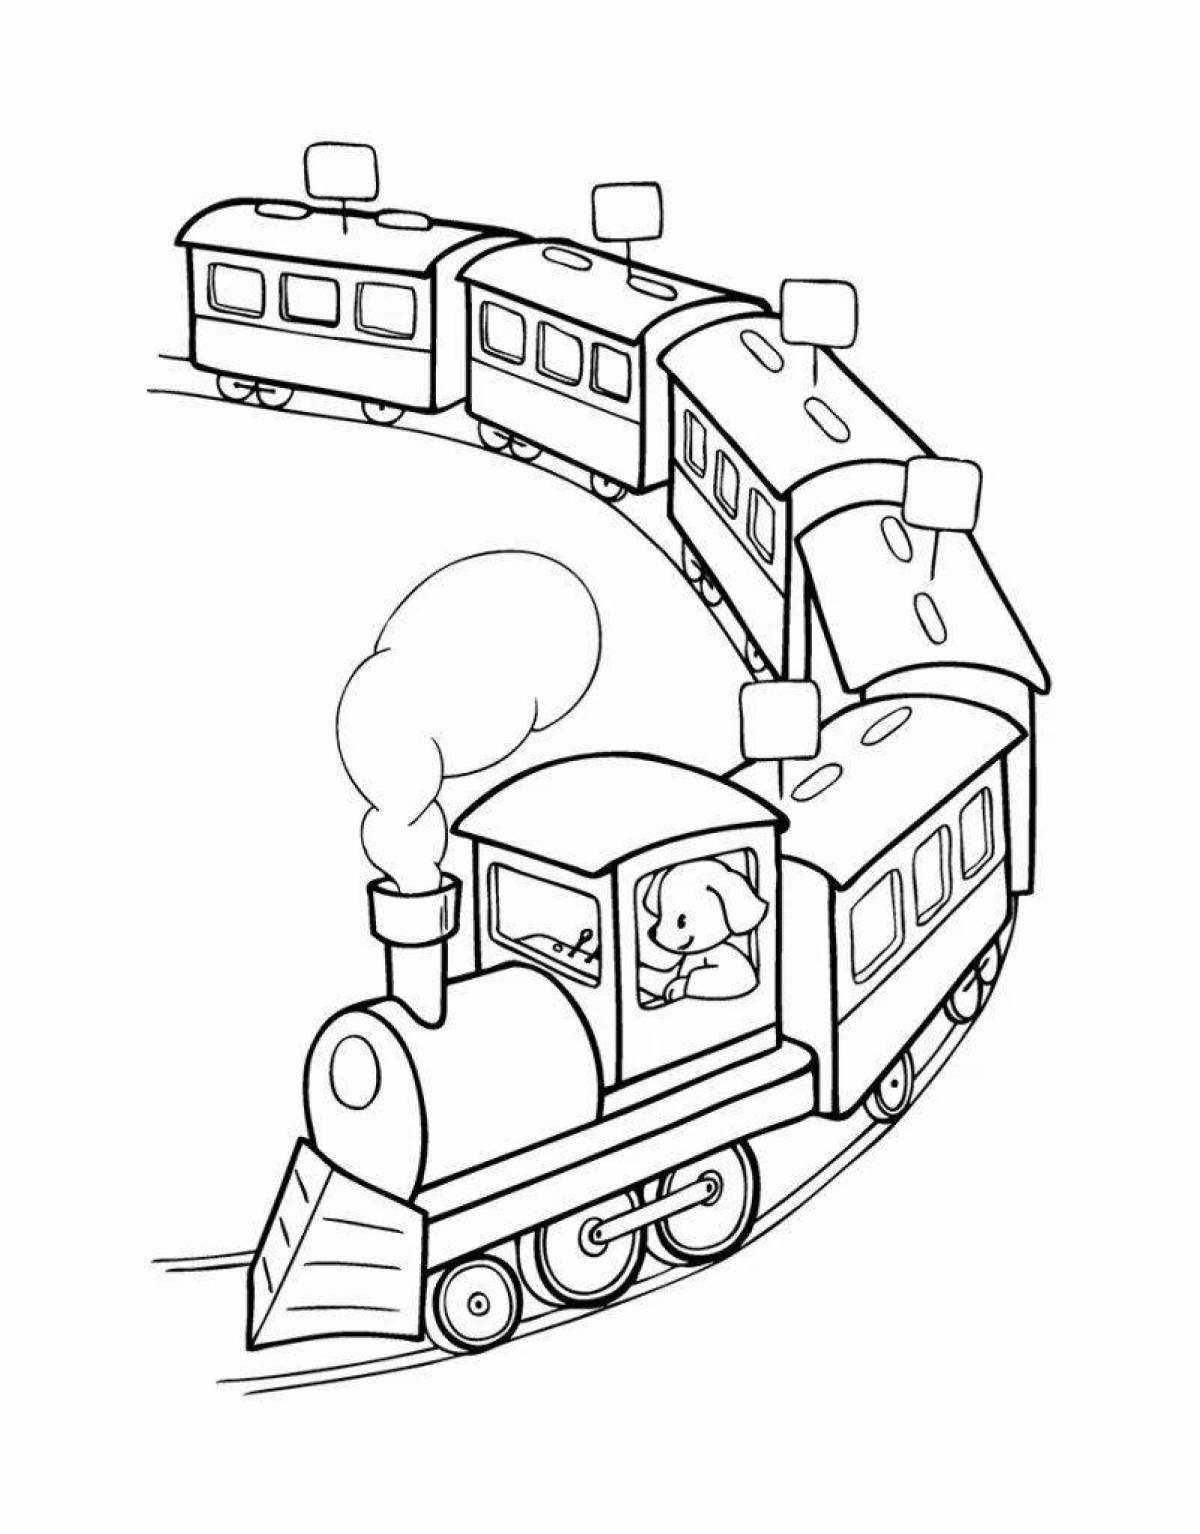 Playful train coloring book for kids